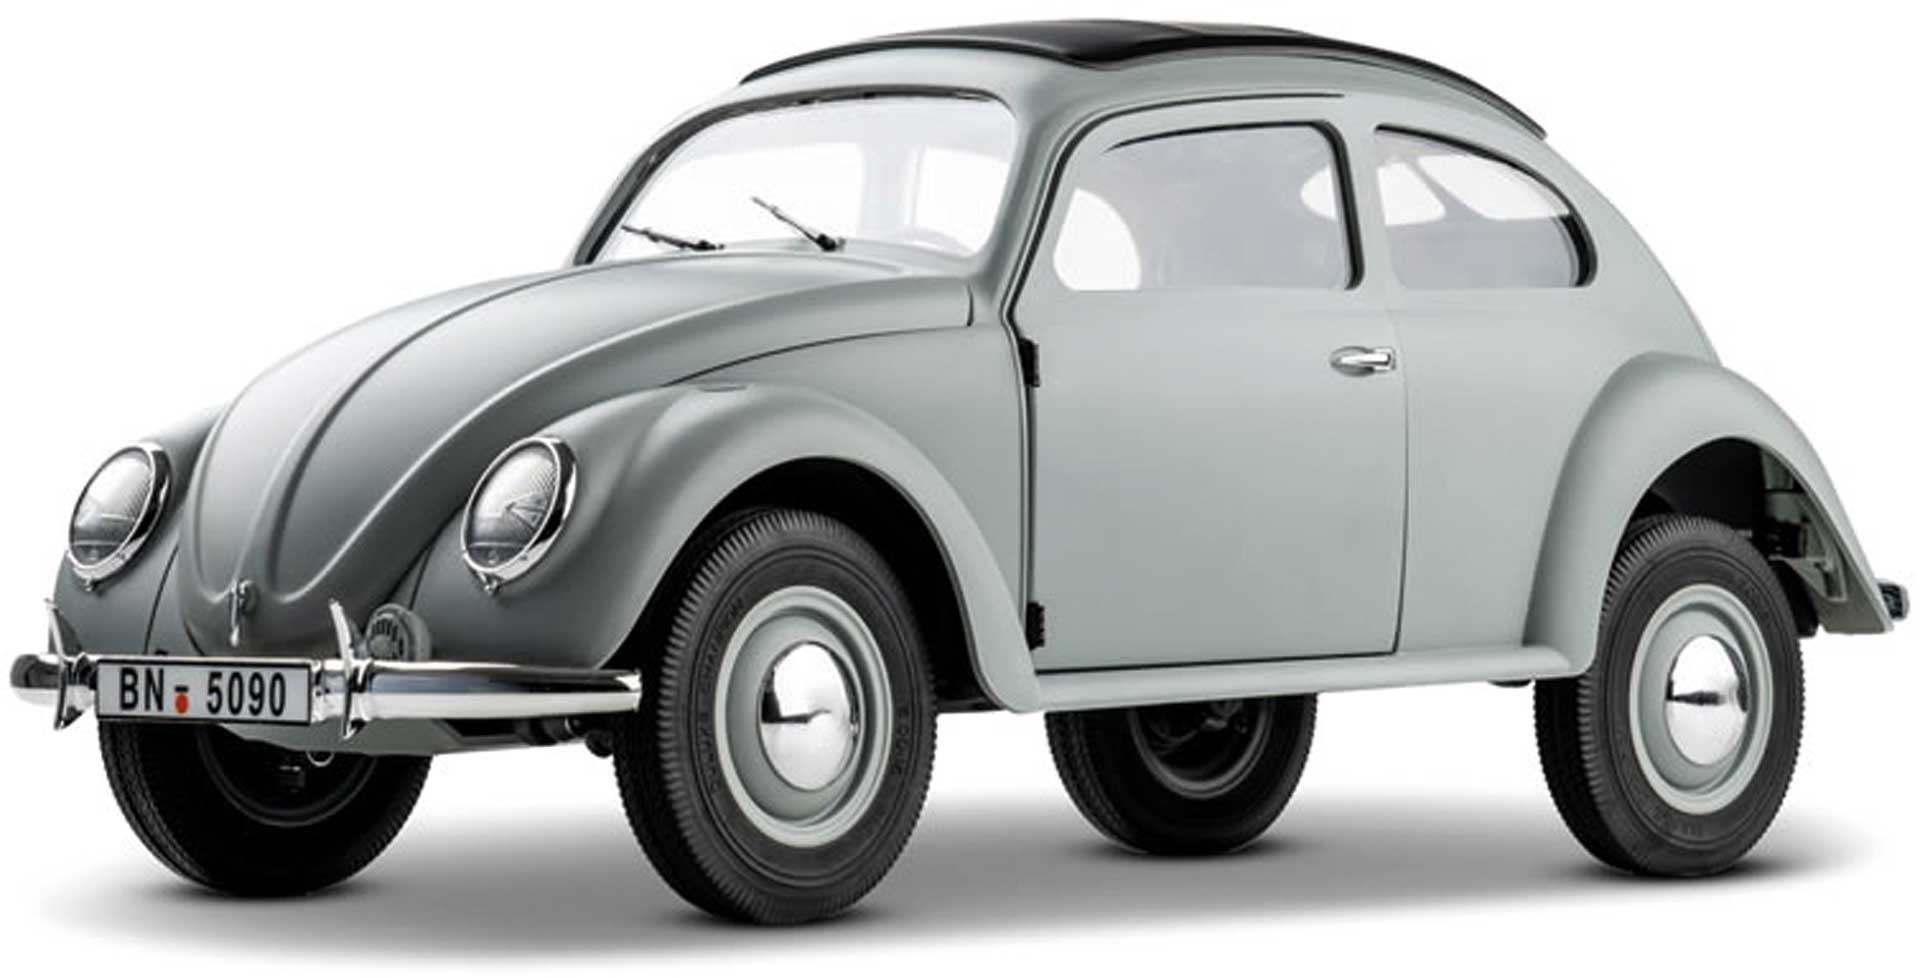 ROC HOBBY Beetle "the peoples car" 1:12 - Scale RTR 2.4 Ghz